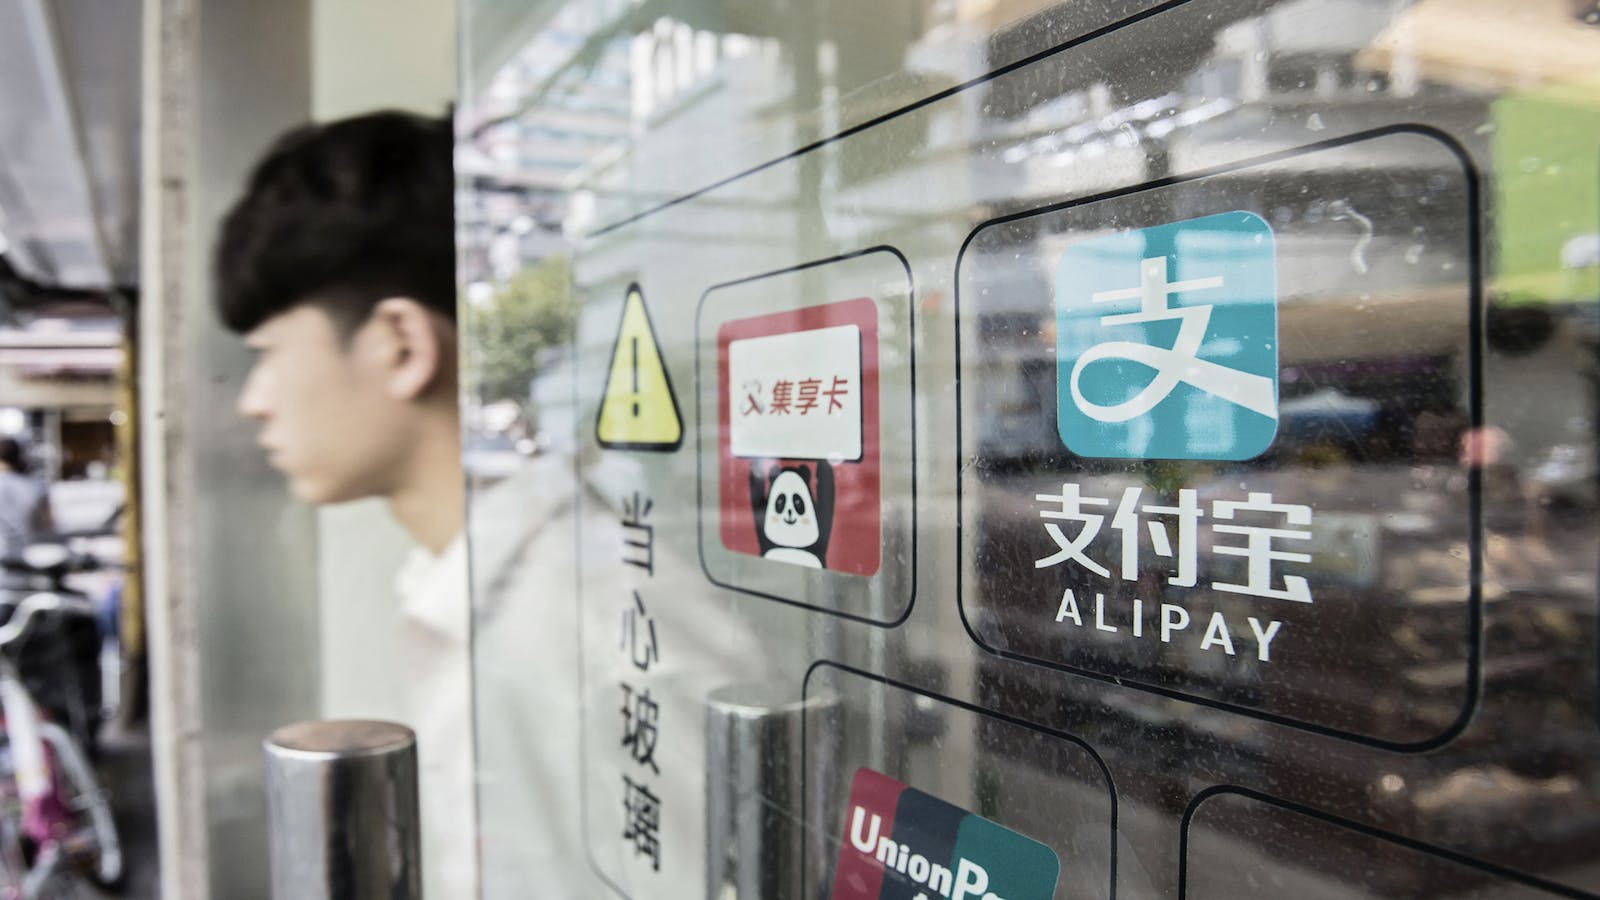 Alipay and Tenpay together hold  91% of the online payments market in China. Photo: Bloomberg